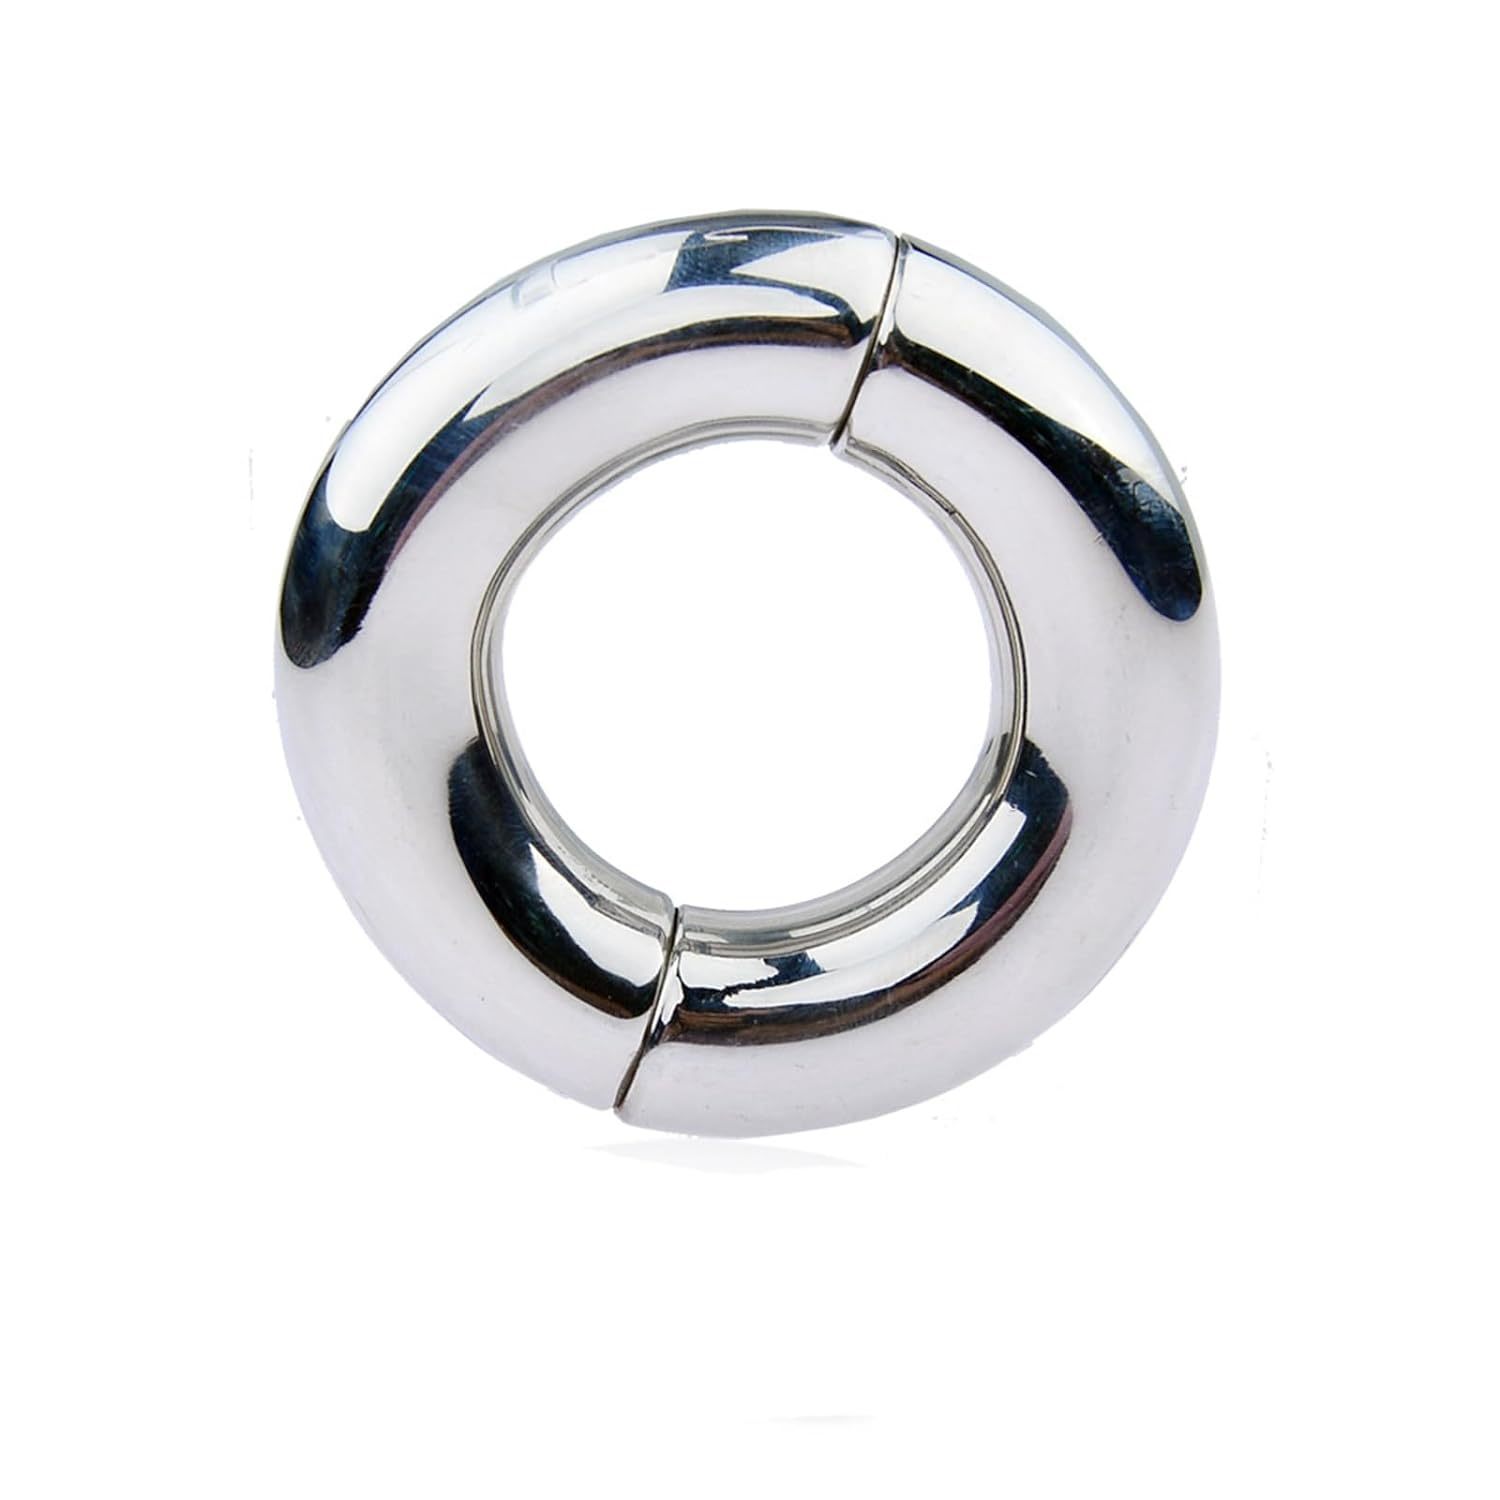 Primary image for Metal Stainless Steel Male Penis Ring Bonder Half Magnet Pendant Cock Ring Adult